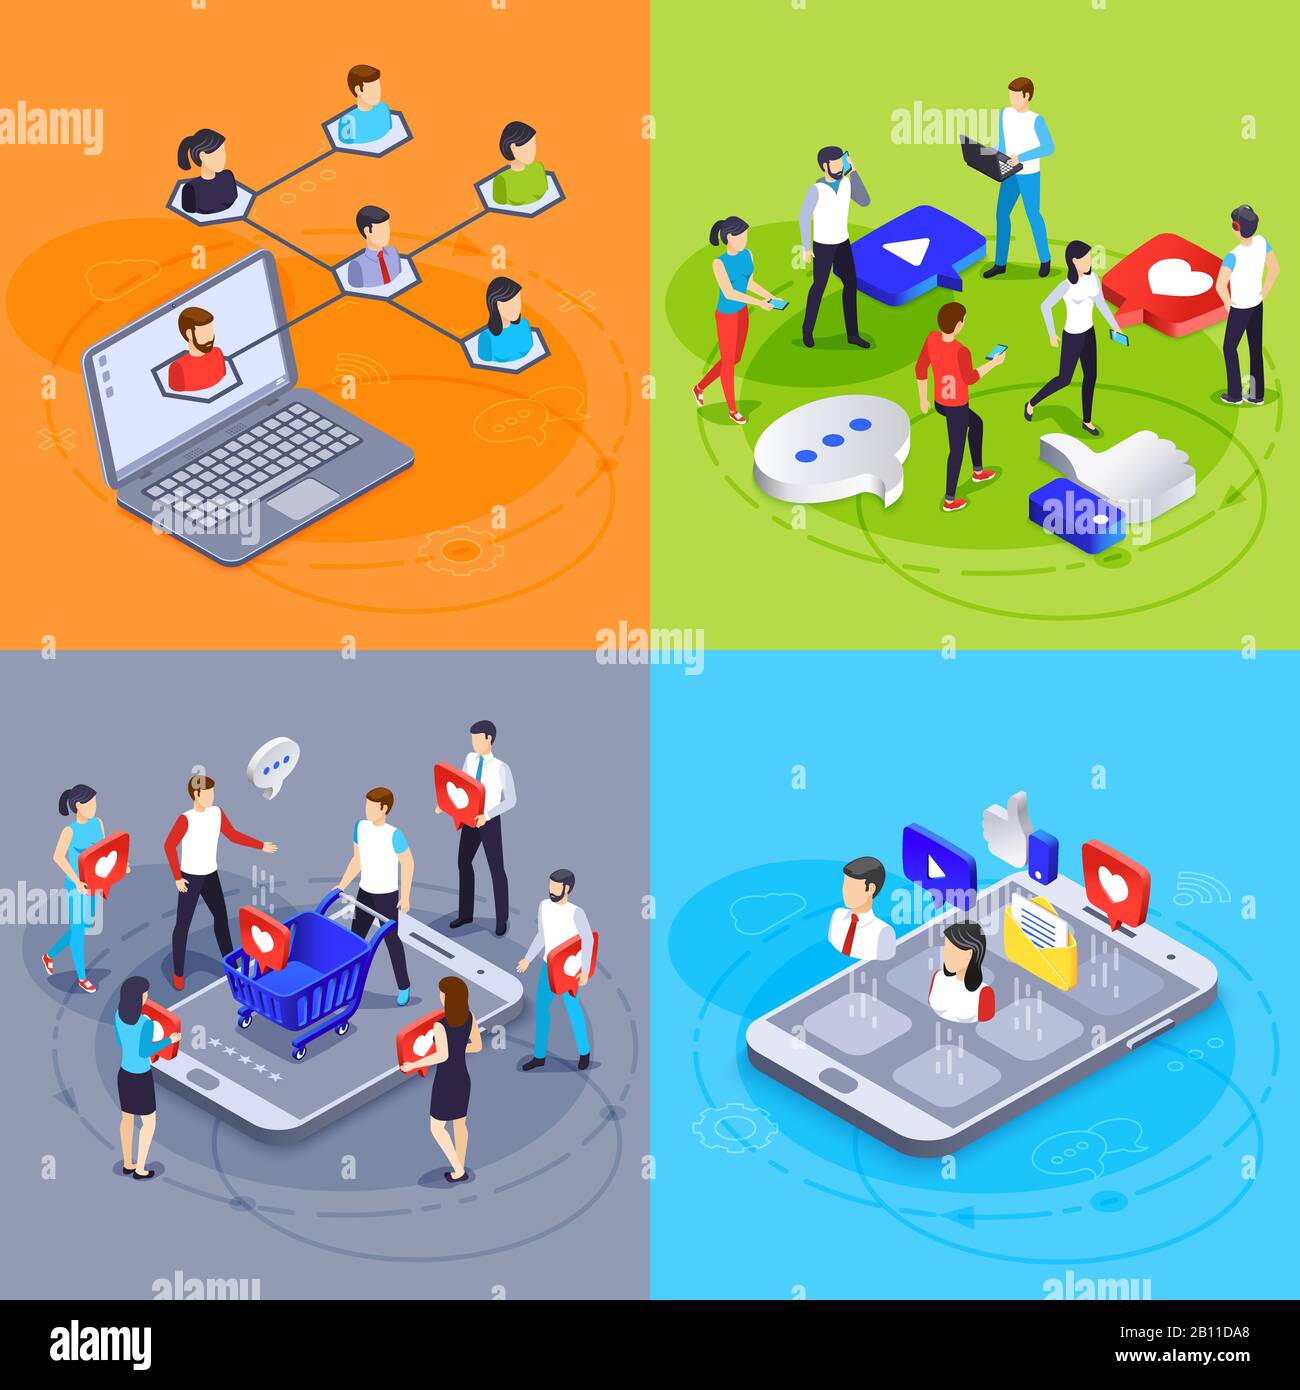 Social media isometric concept. Digital marketing and online advertising agency. Ads hashtag, likes and followers vector illustration Stock Vector